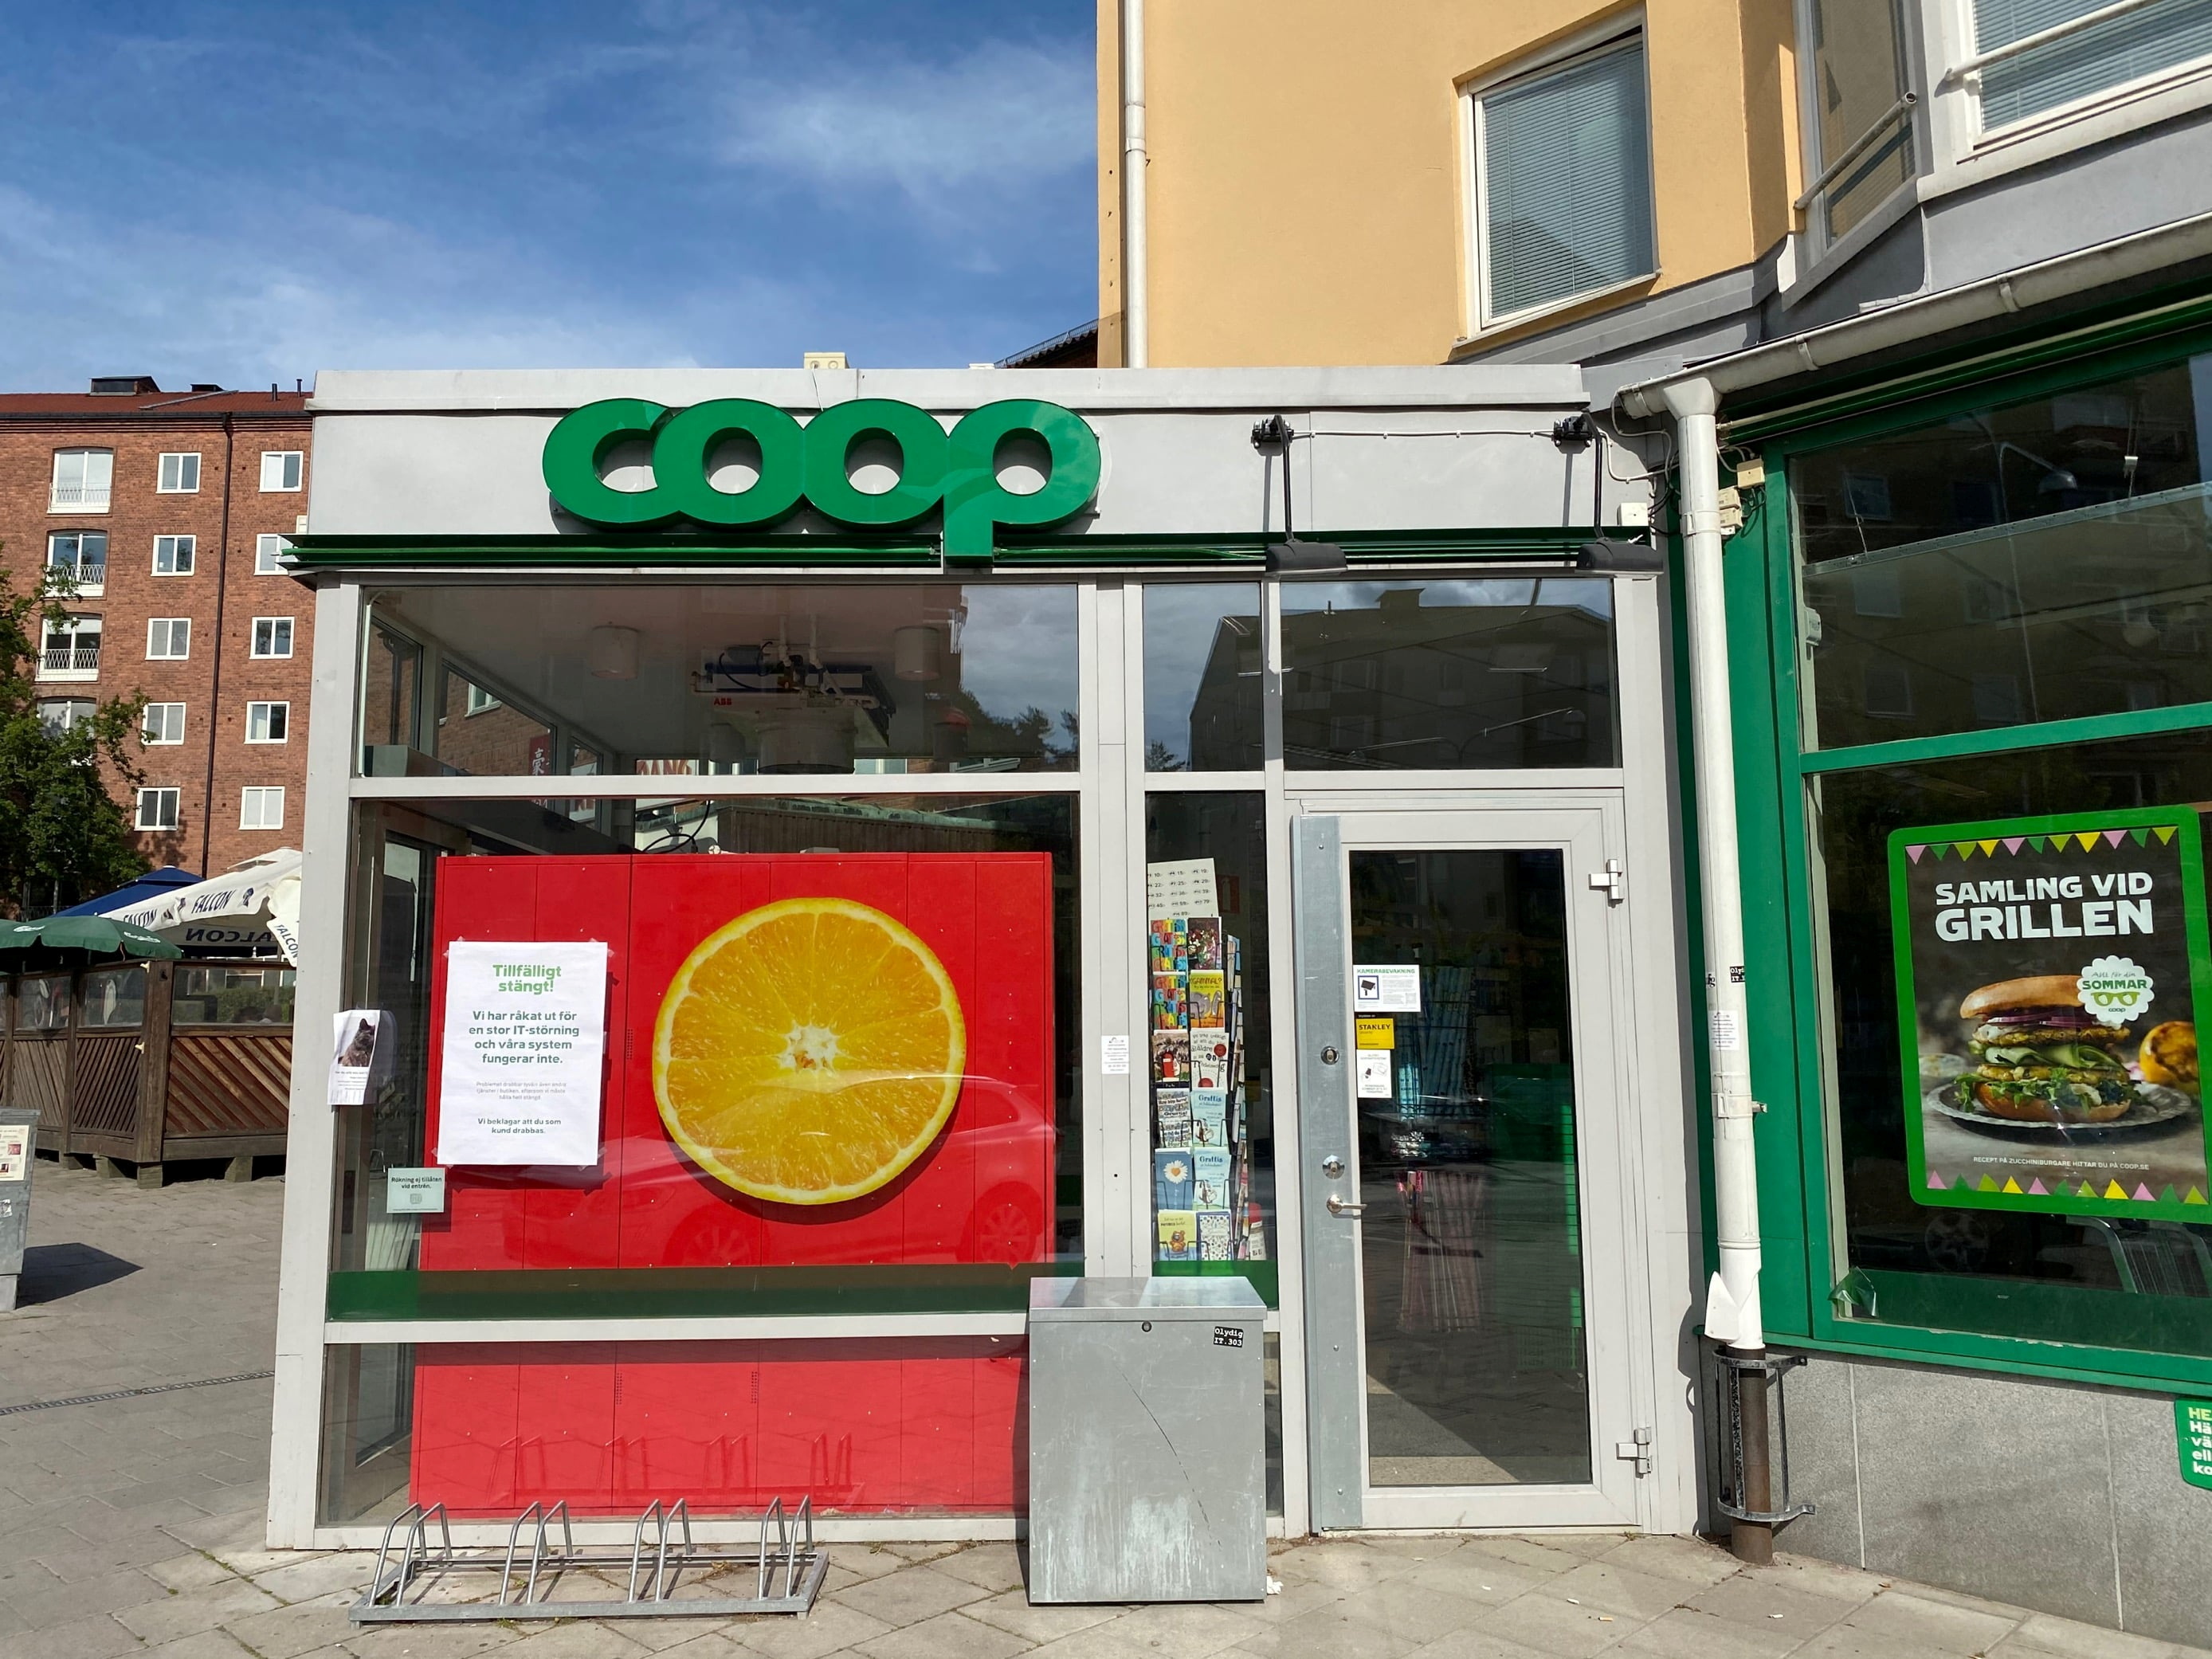 A view of a Coop grocery store as hundreds of Coop grocery stores were shuttered after a ransomware attack compromised its computer systems in Stockholm